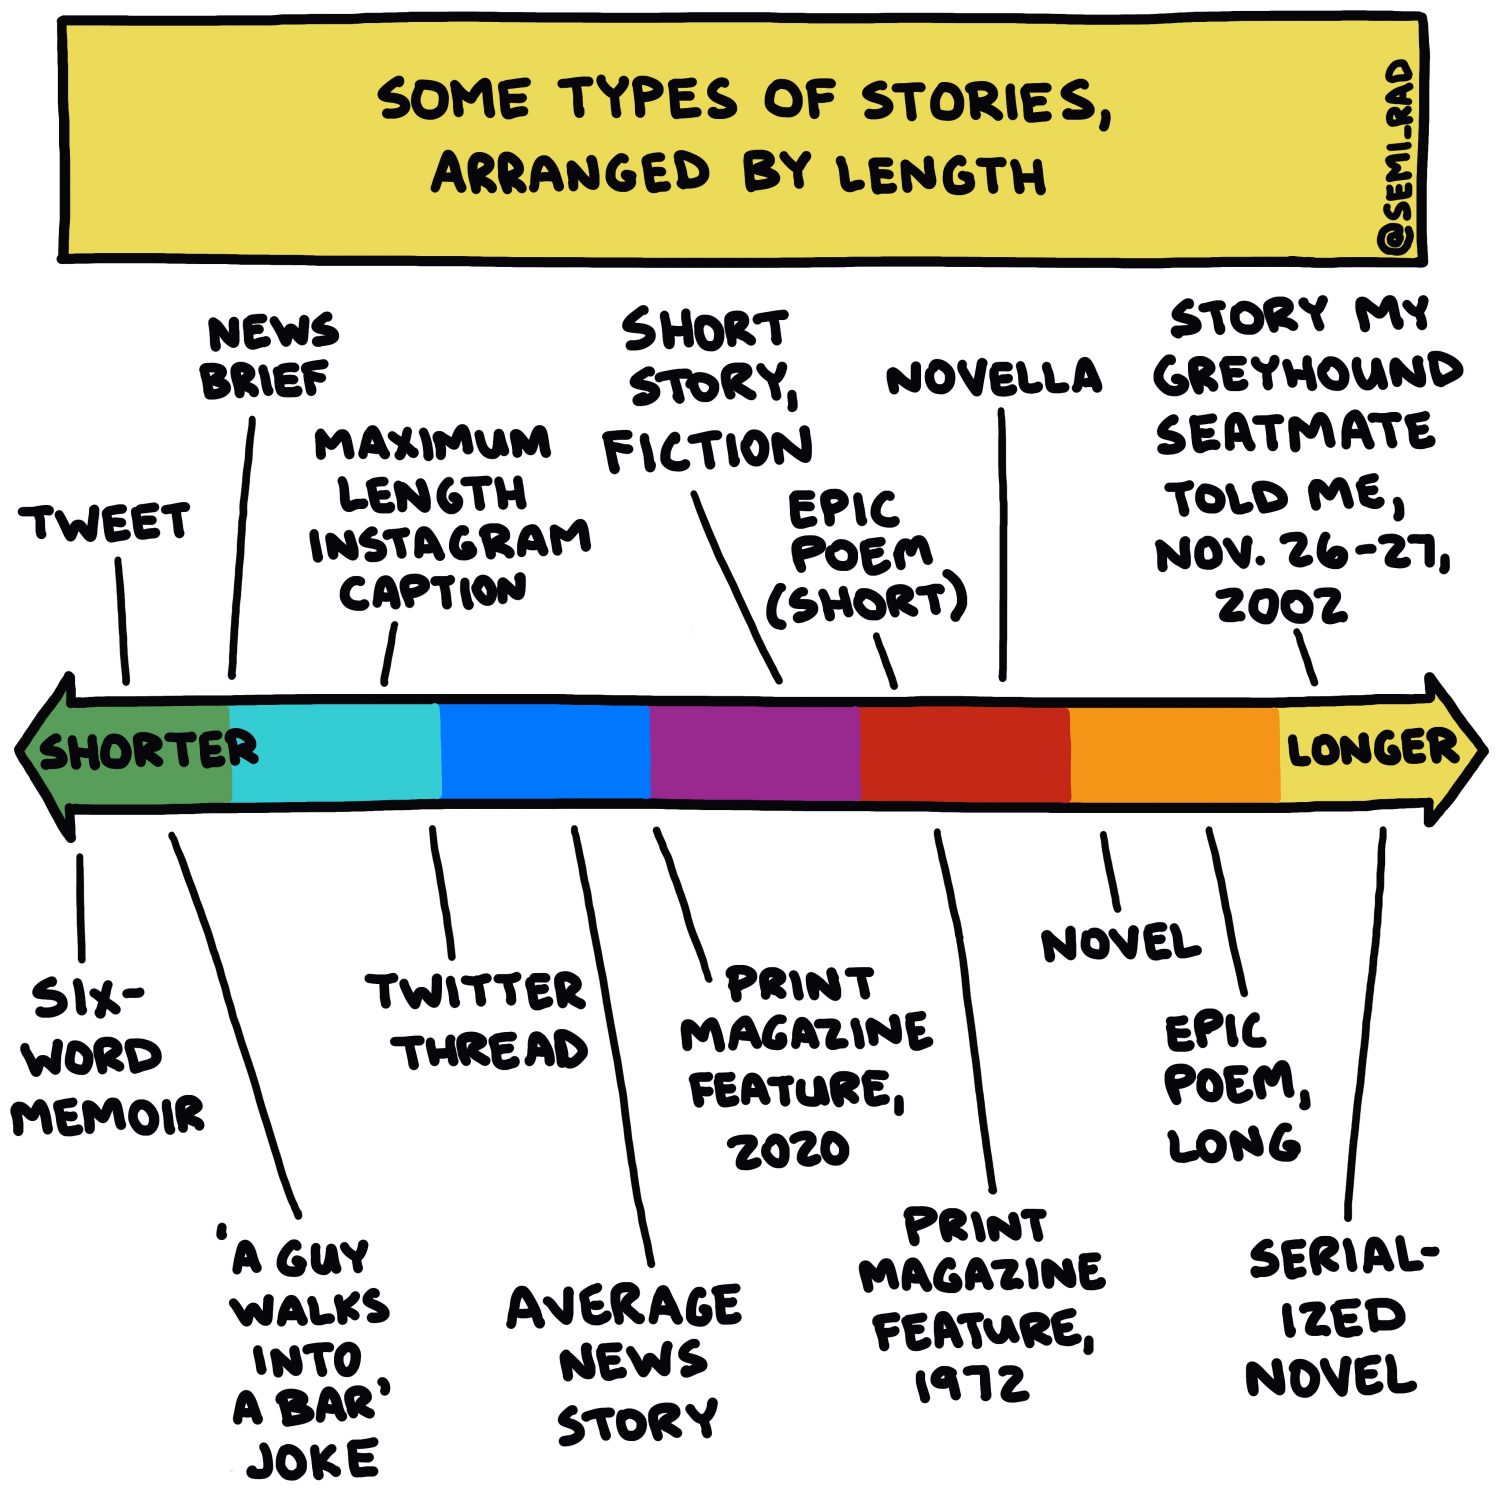 Some Types Of Stories, Arranged By Length